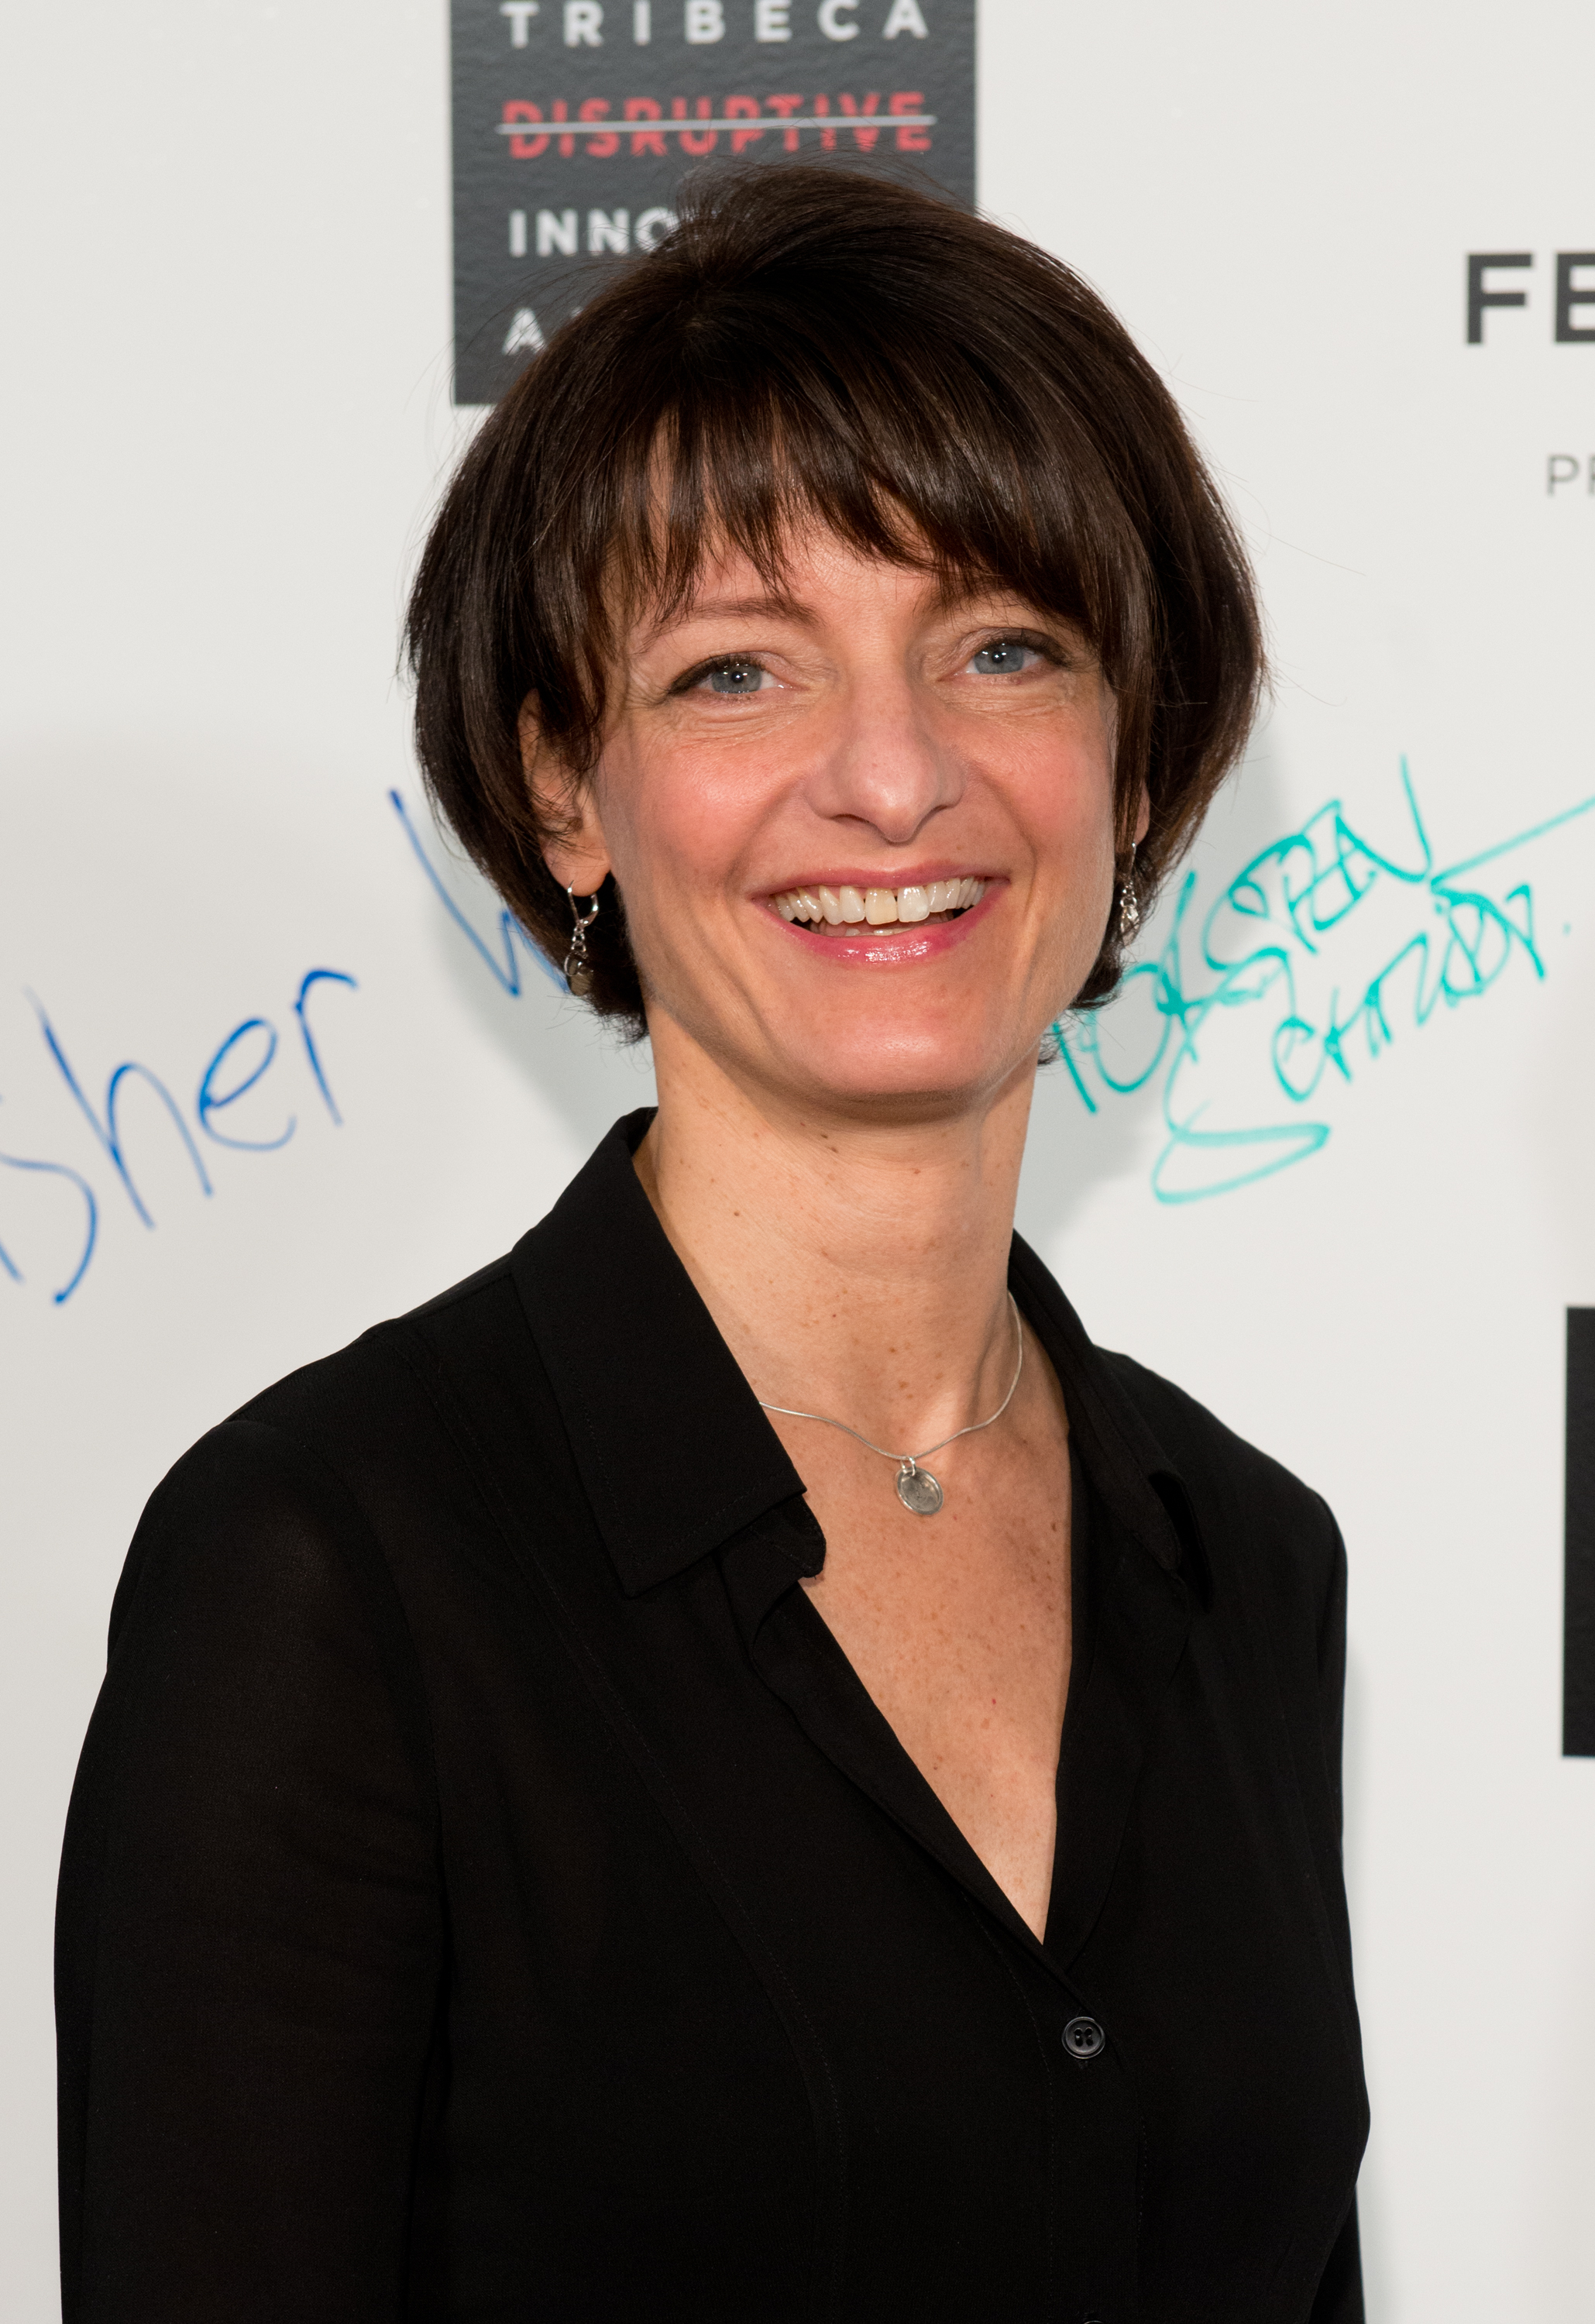 Regina Dugan attends The Disruptive Innovation Awards during the 2014 Tribeca Film Festival at Jack H. Skirball Center for the Performing Arts on April 25, 2014 in New York City. (Noam Galai&mdash;WireImage)